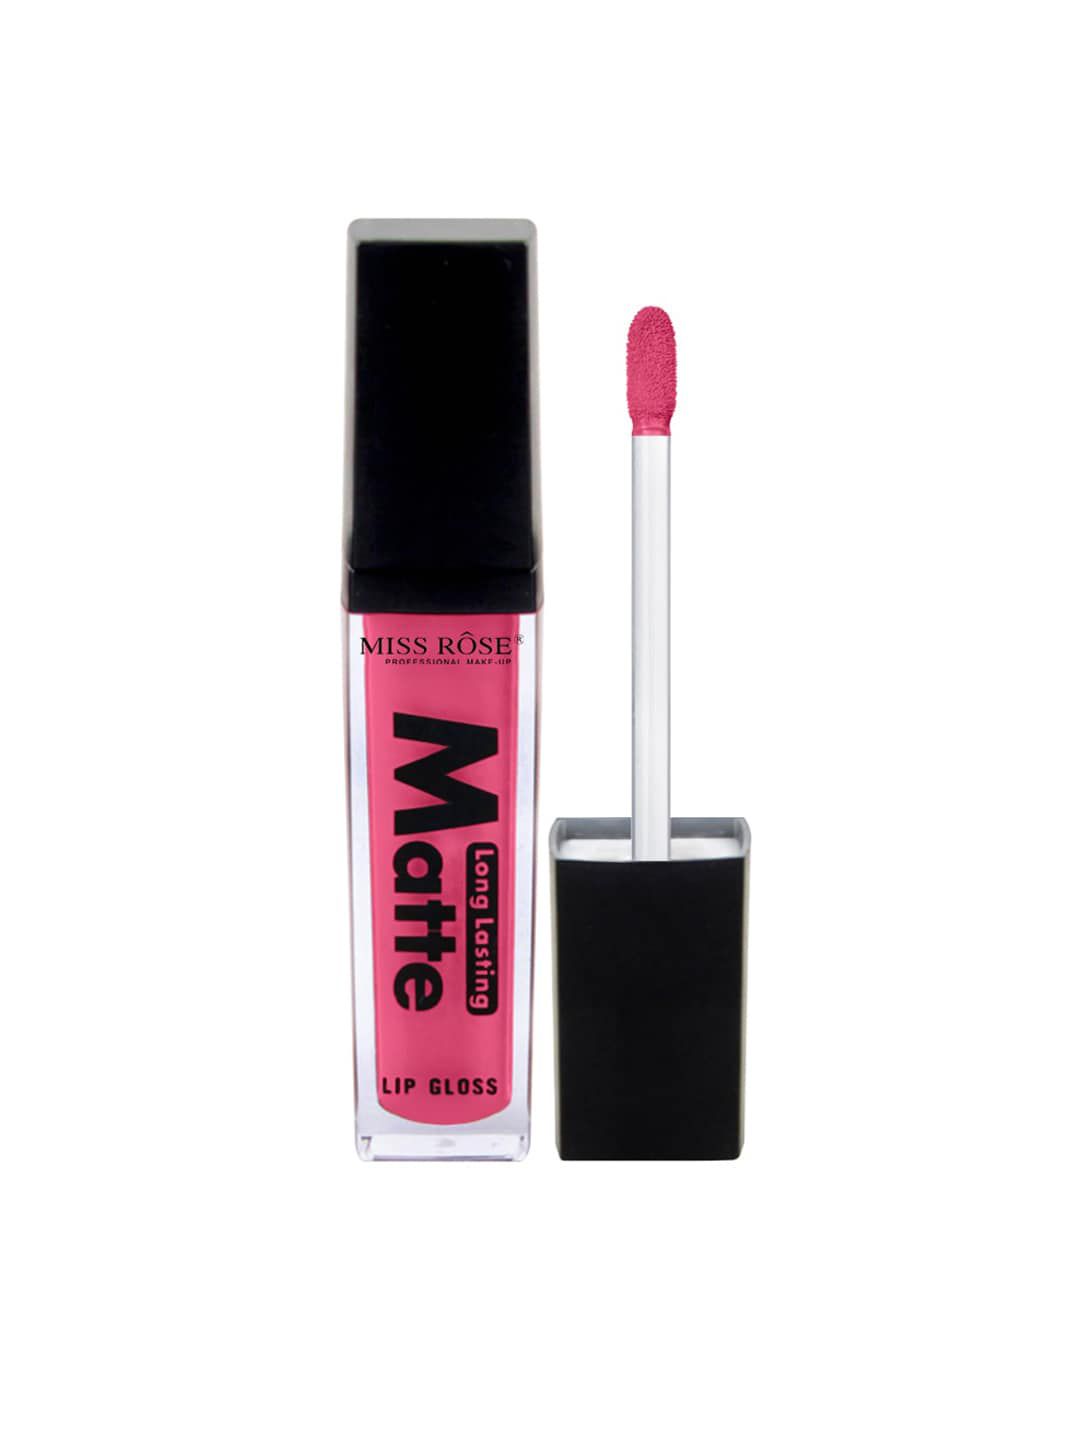 MISS ROSE Matte Long Lasting LipGloss 7701-002M 12 20 gm Price in India